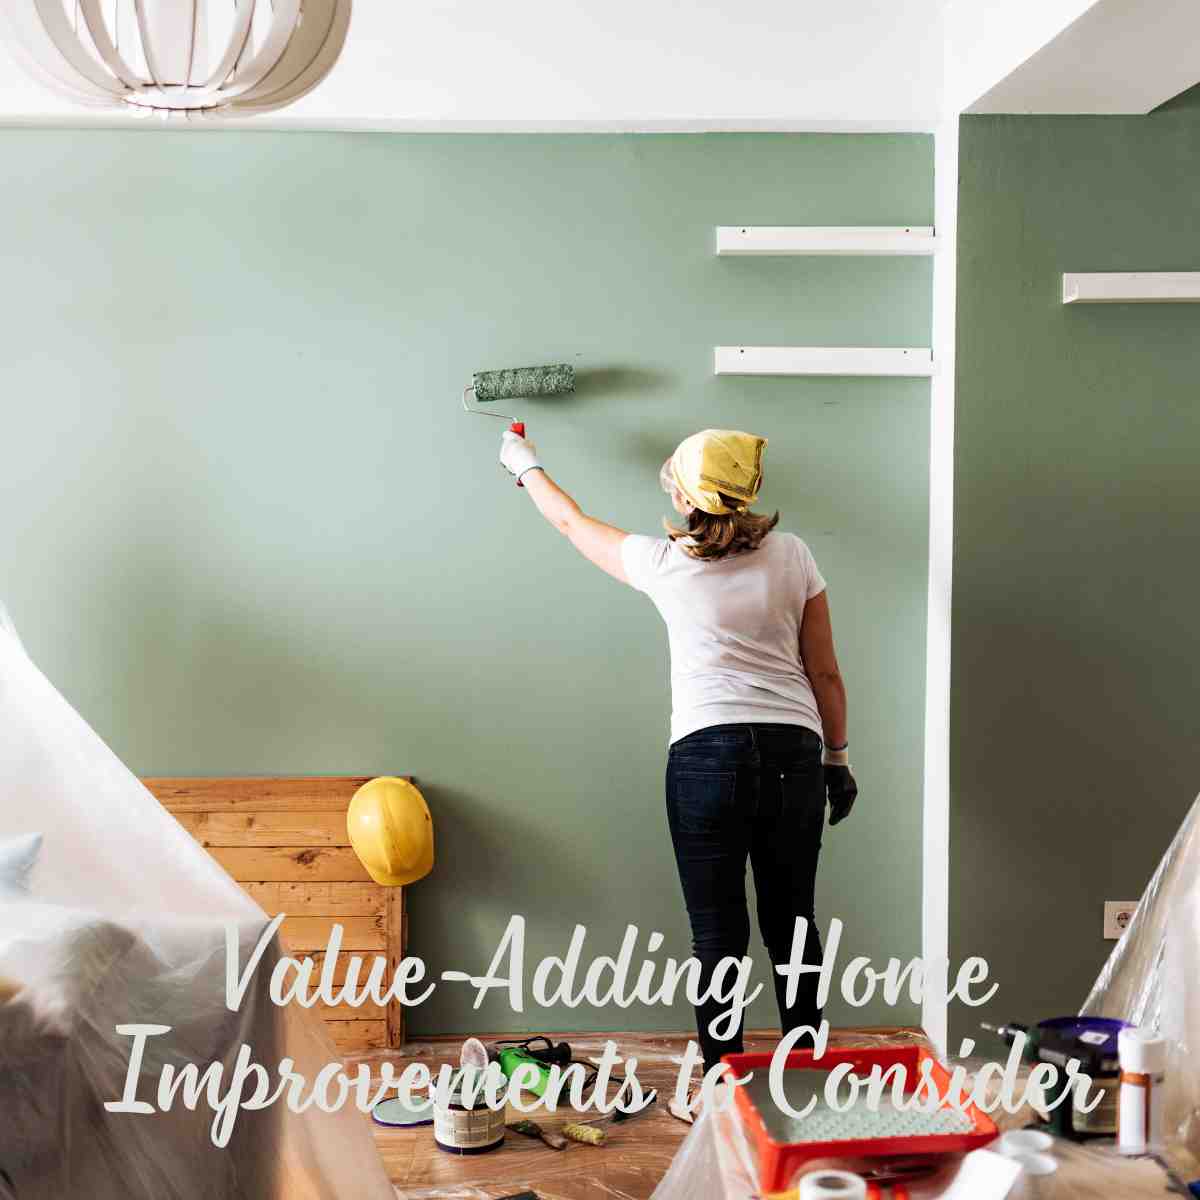 Value-Adding Home Improvements to Consider